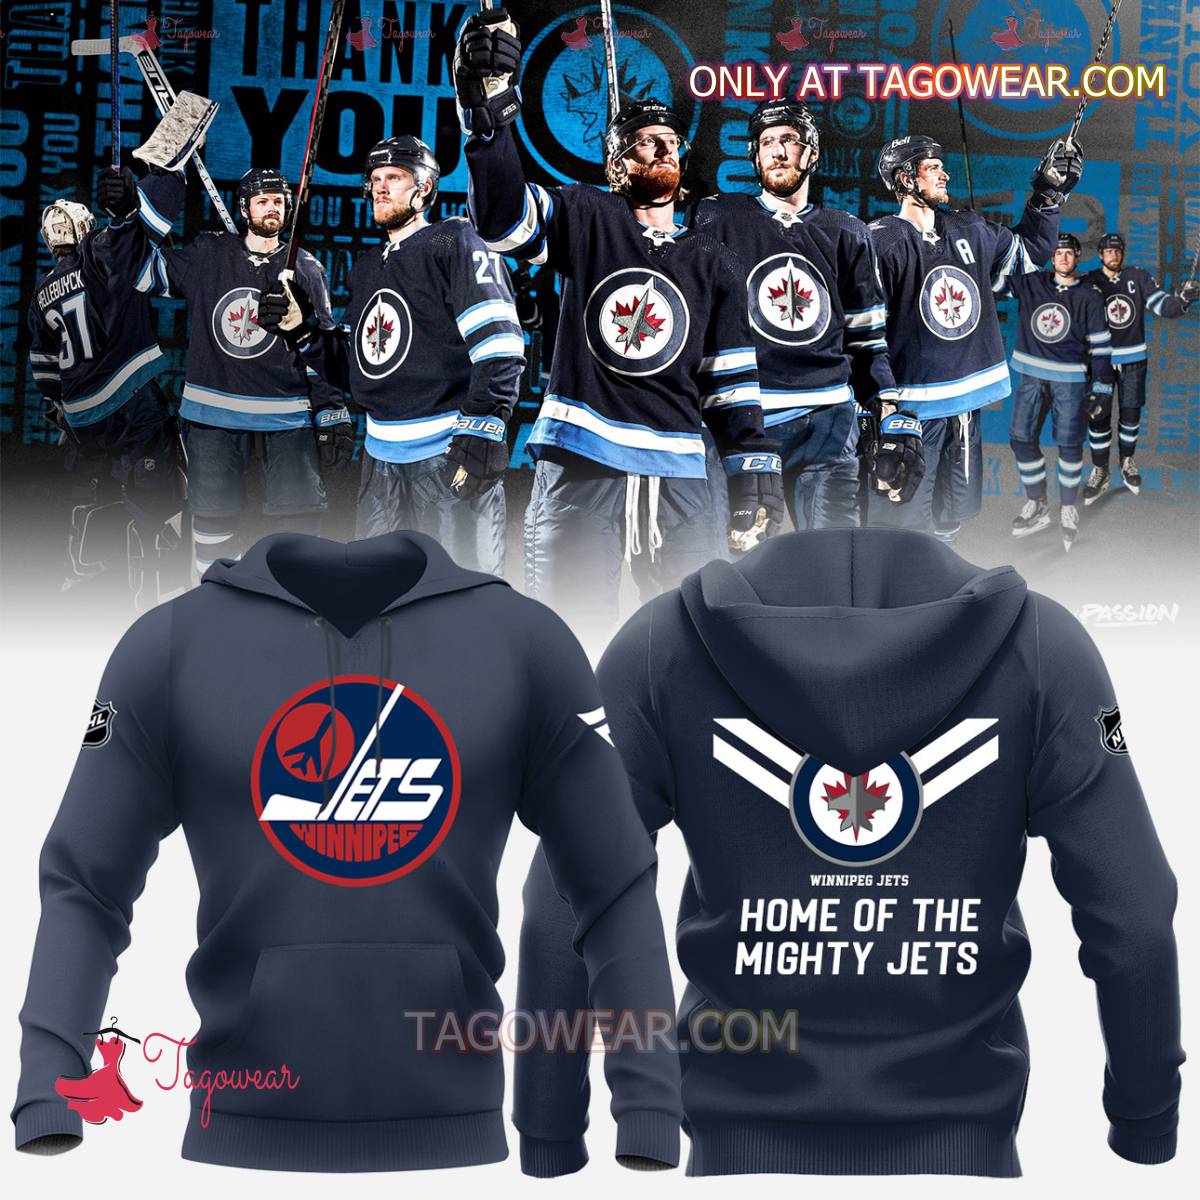 Winnipeg Jets Home Of The Mighty Jets Hoodie